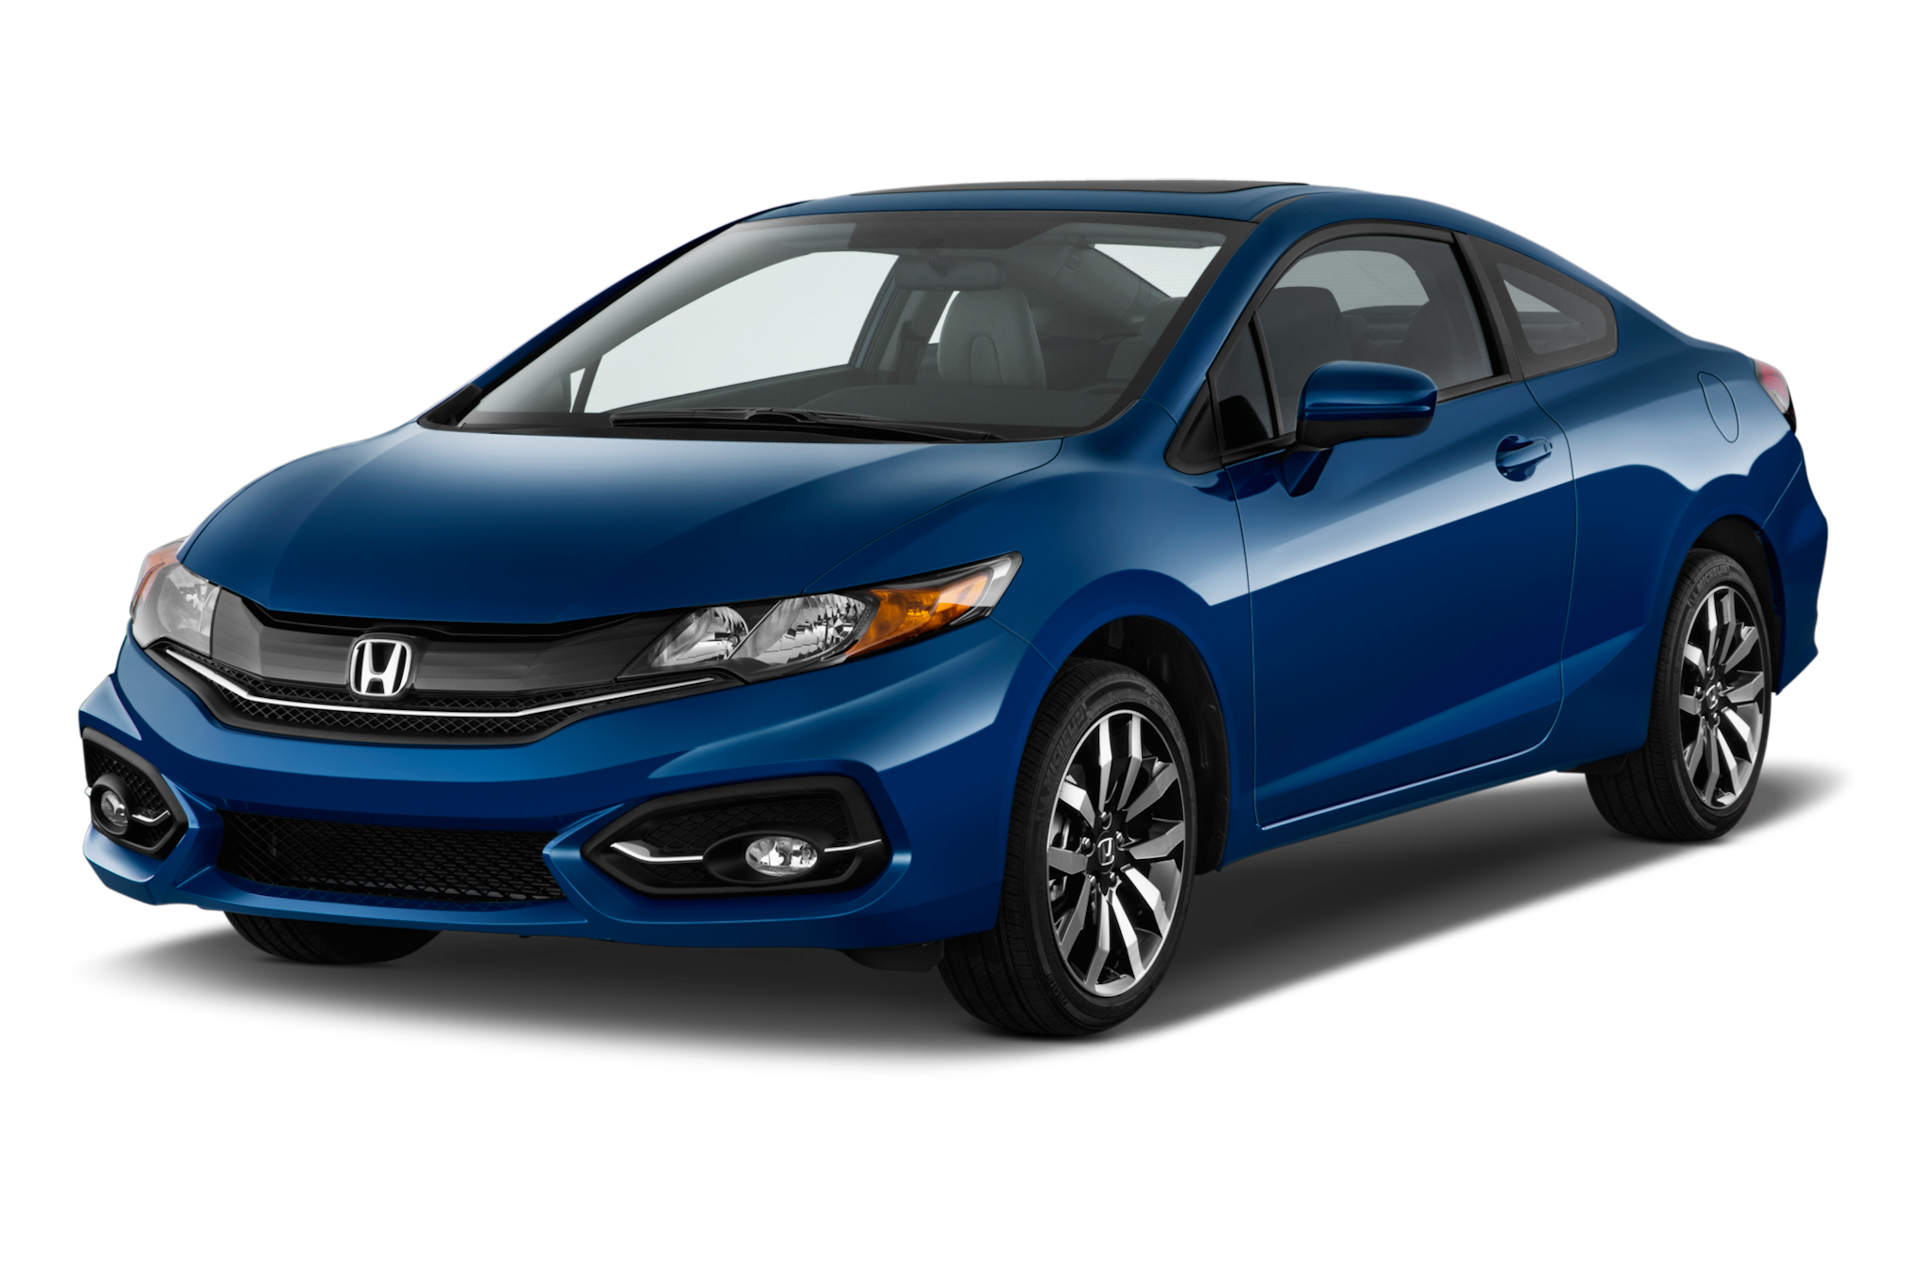 2014 Honda Civic Prices, Reviews, and Photos - MotorTrend